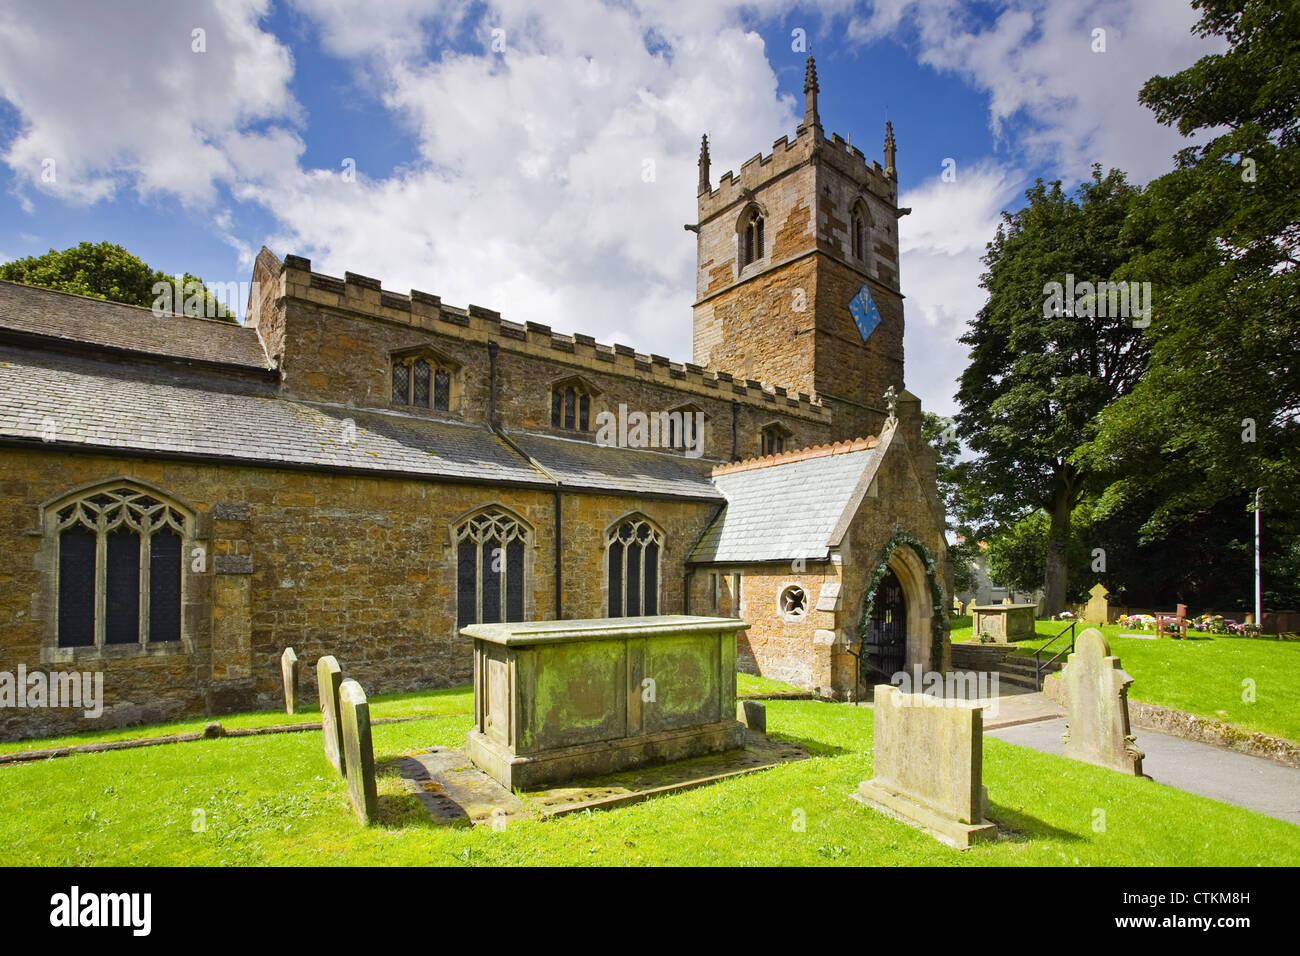 Saint Peter and Saint Paul Church in the market town of Caistor on the edge of the Lincolnshire Wolds Stock Photo